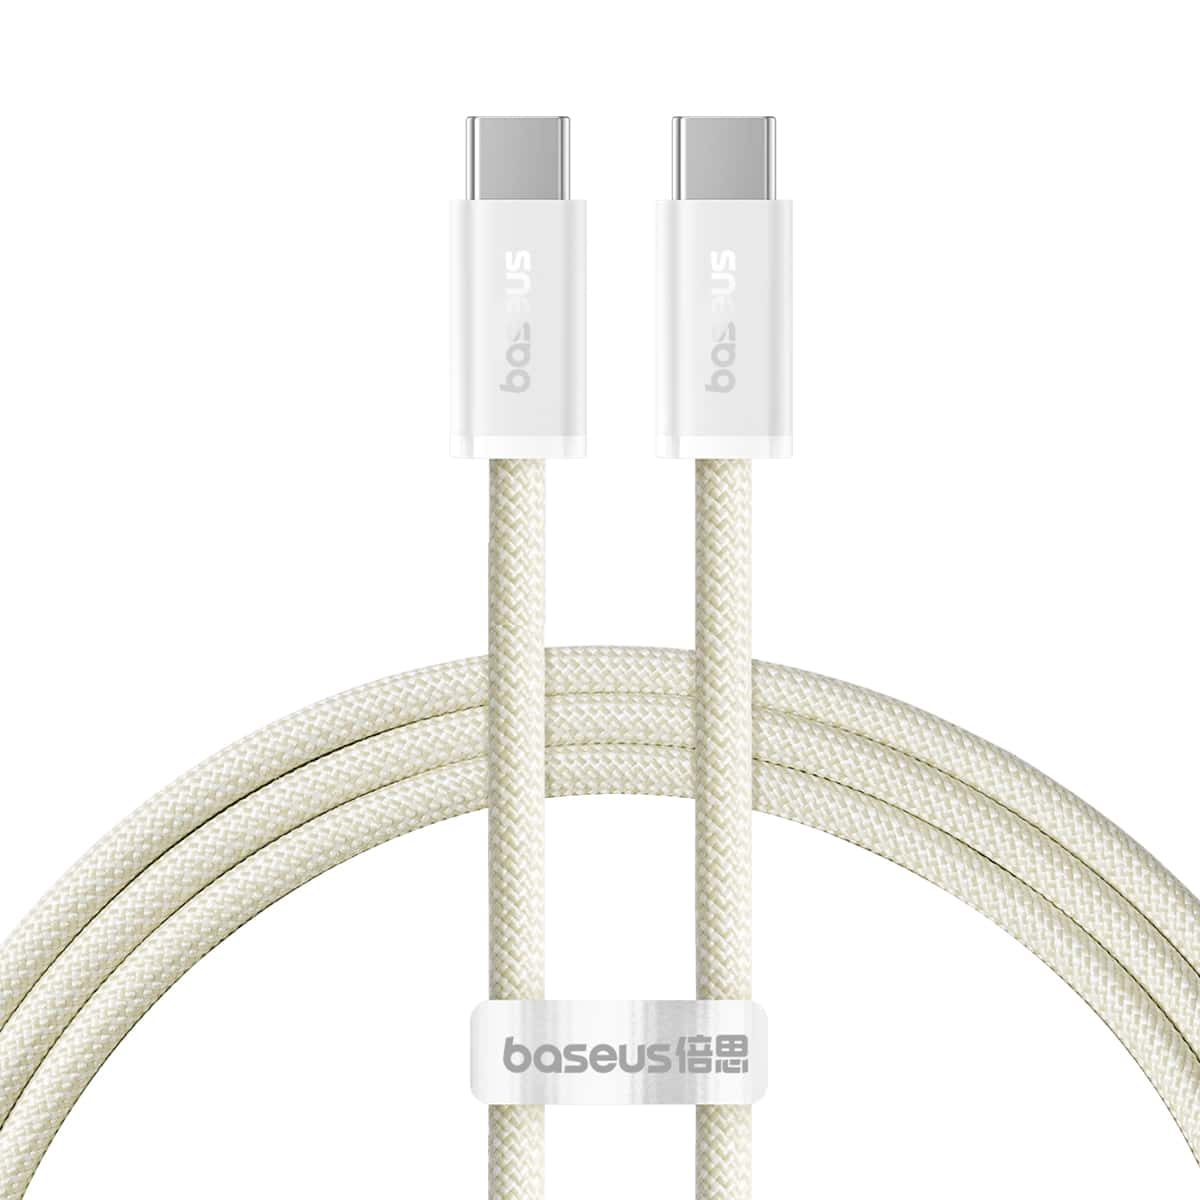 Baseus Dynamic Fast Charging Data Cable Yelllow Price in Pakistan 